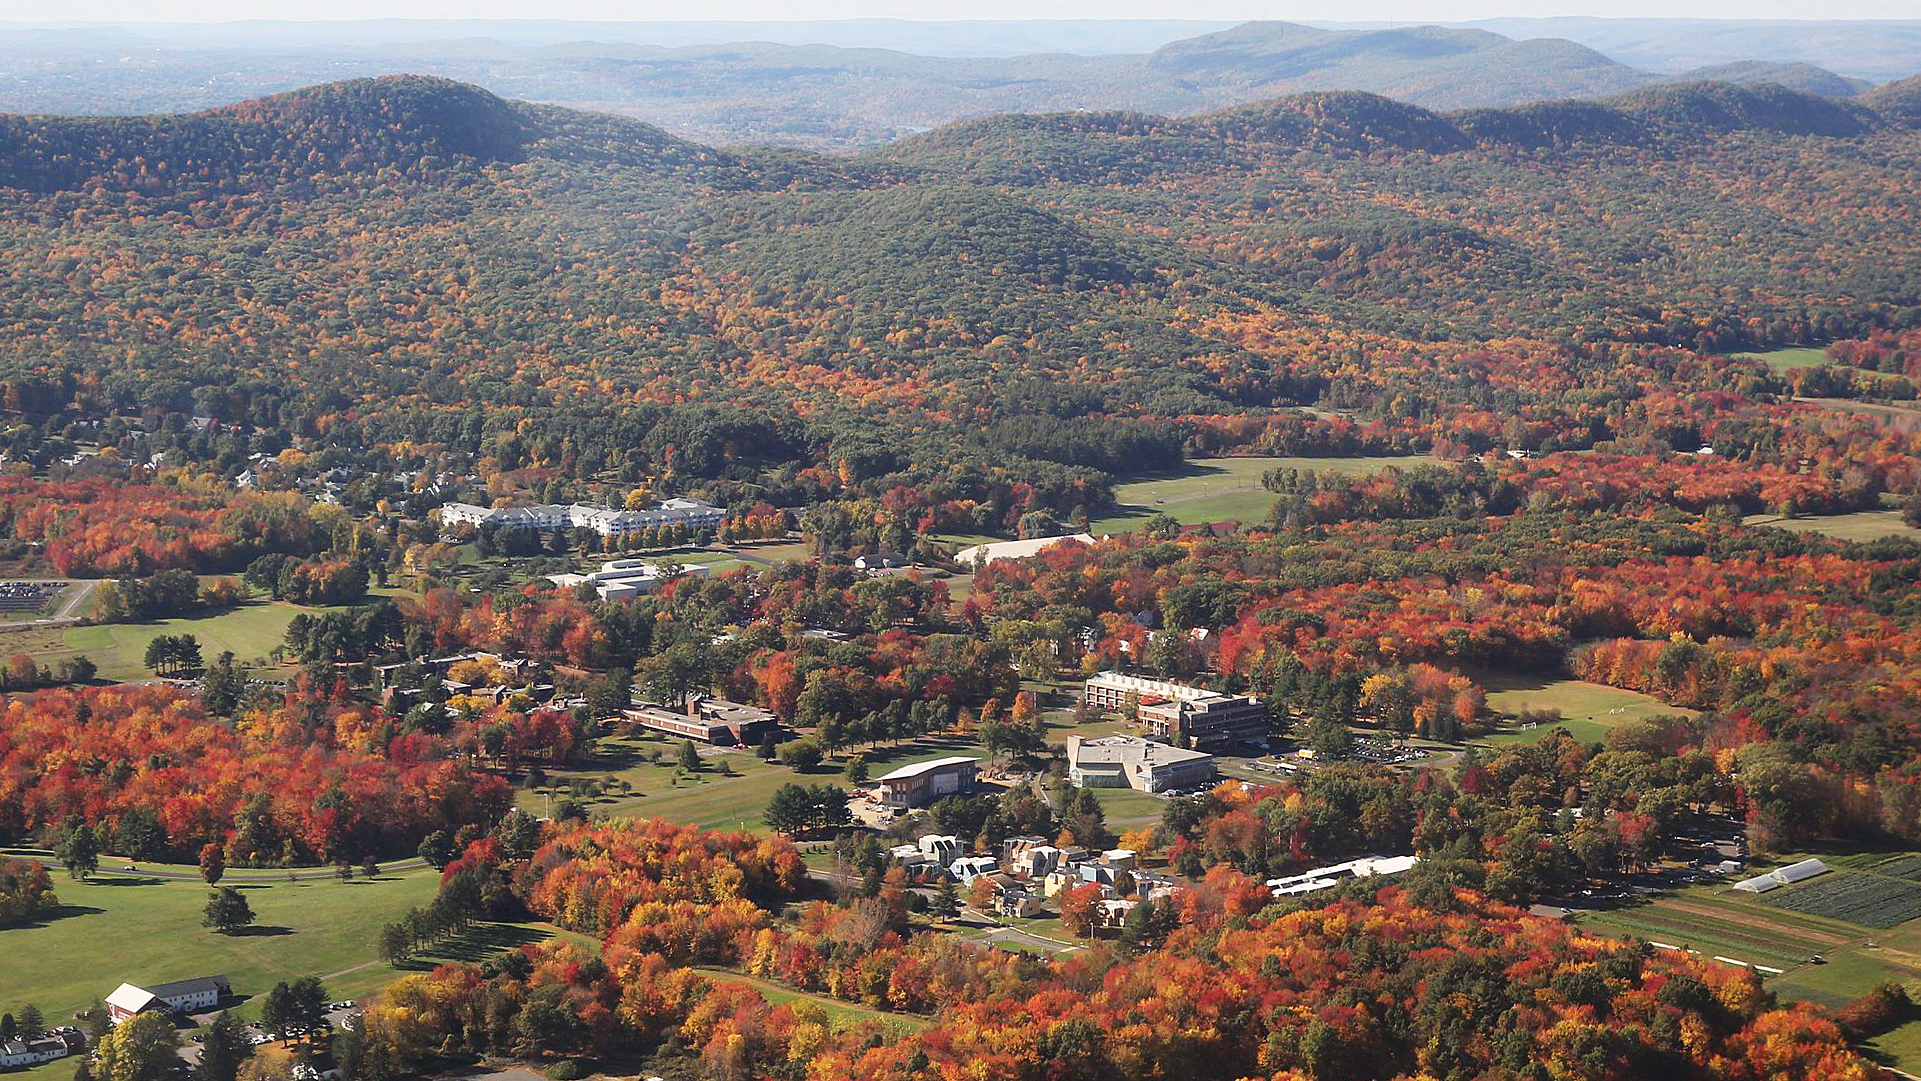 Hampshire College's faculty union agreed to a salary reduction as a way to avoid layoffs.